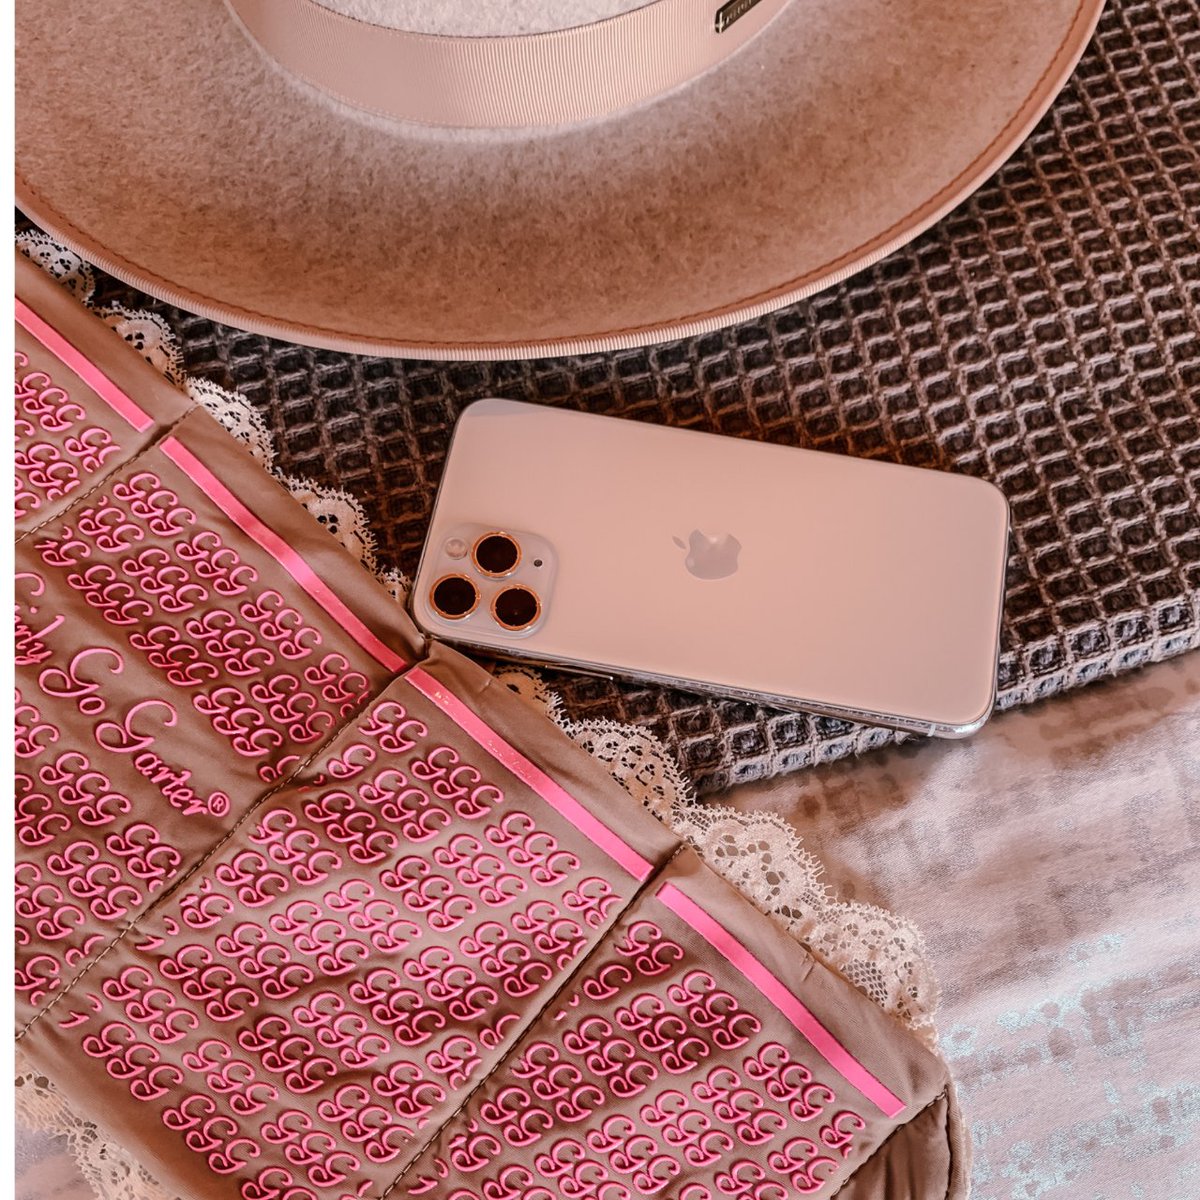 Cute hat ✔️
Phone ✔️
Best accessory to carry your stuff ✔️

#girlygogarter #fashion #accessories #accessoriesoftheday #womenaccessories #accessibility #womensaccessories #accessorieslovers #fashionaccessory #accessorieslover #luxuryaccessories